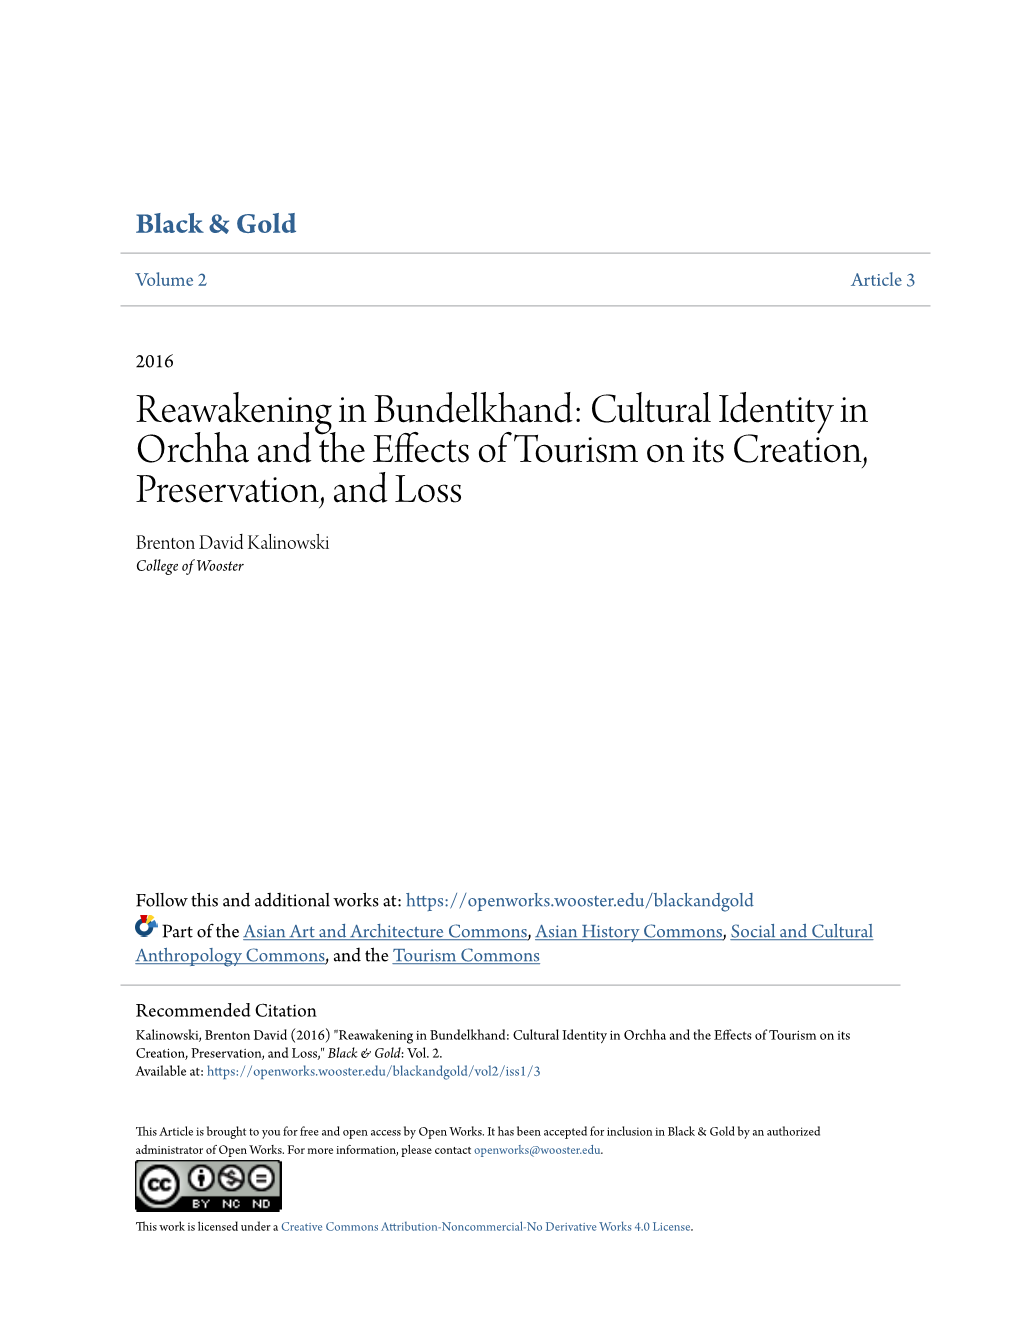 Reawakening in Bundelkhand: Cultural Identity in Orchha and the Effects of Tourism on Its Creation, Preservation, and Loss Brenton David Kalinowski College of Wooster